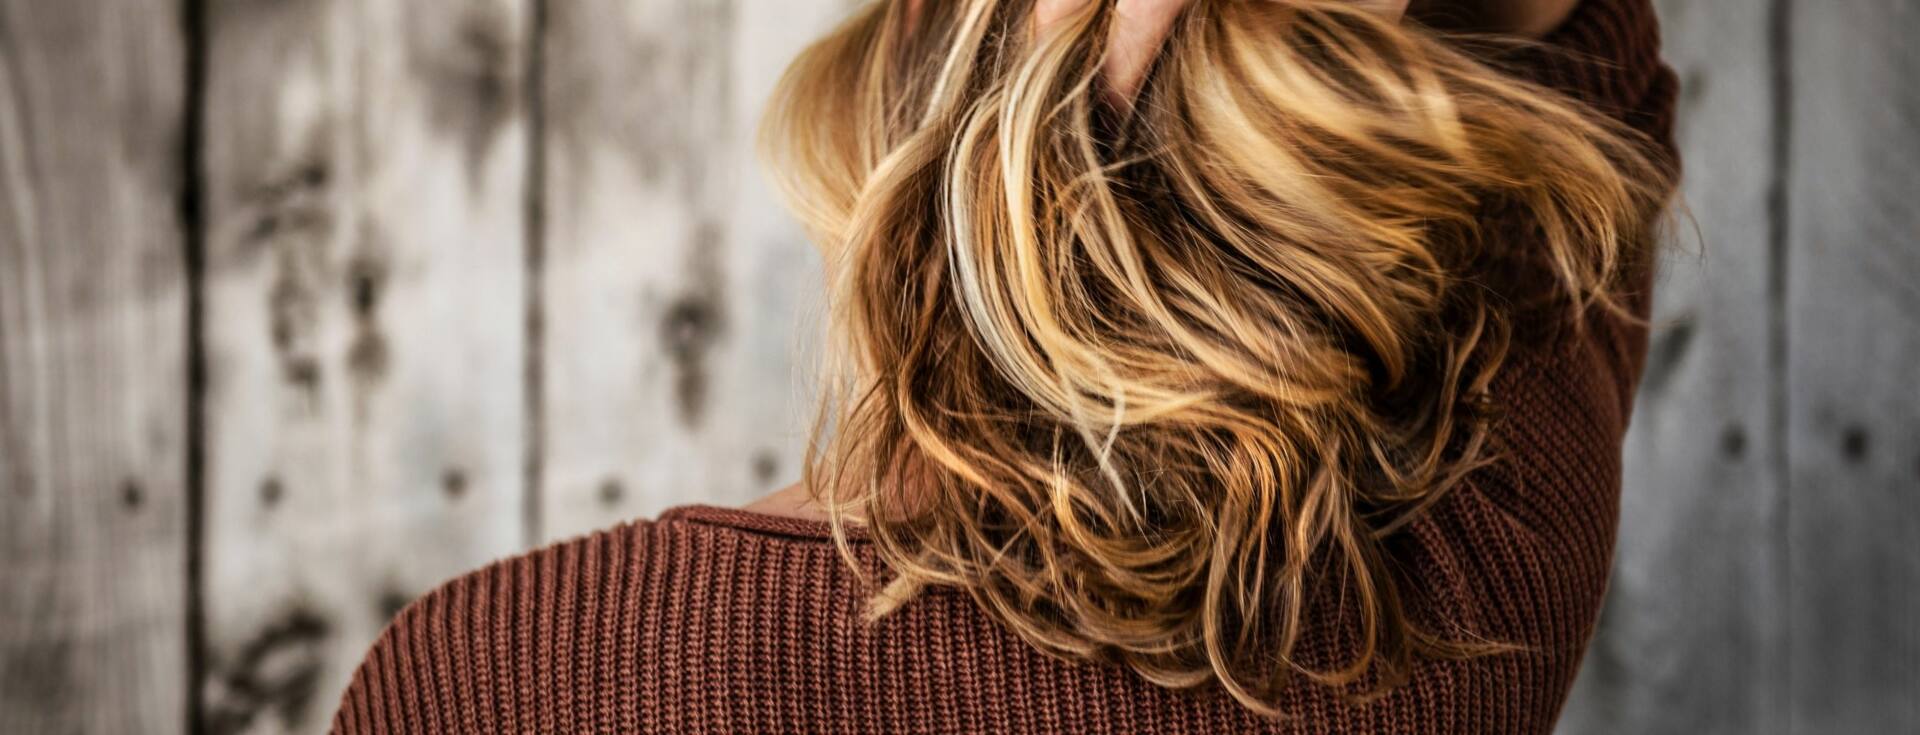 Back of a woman's hair